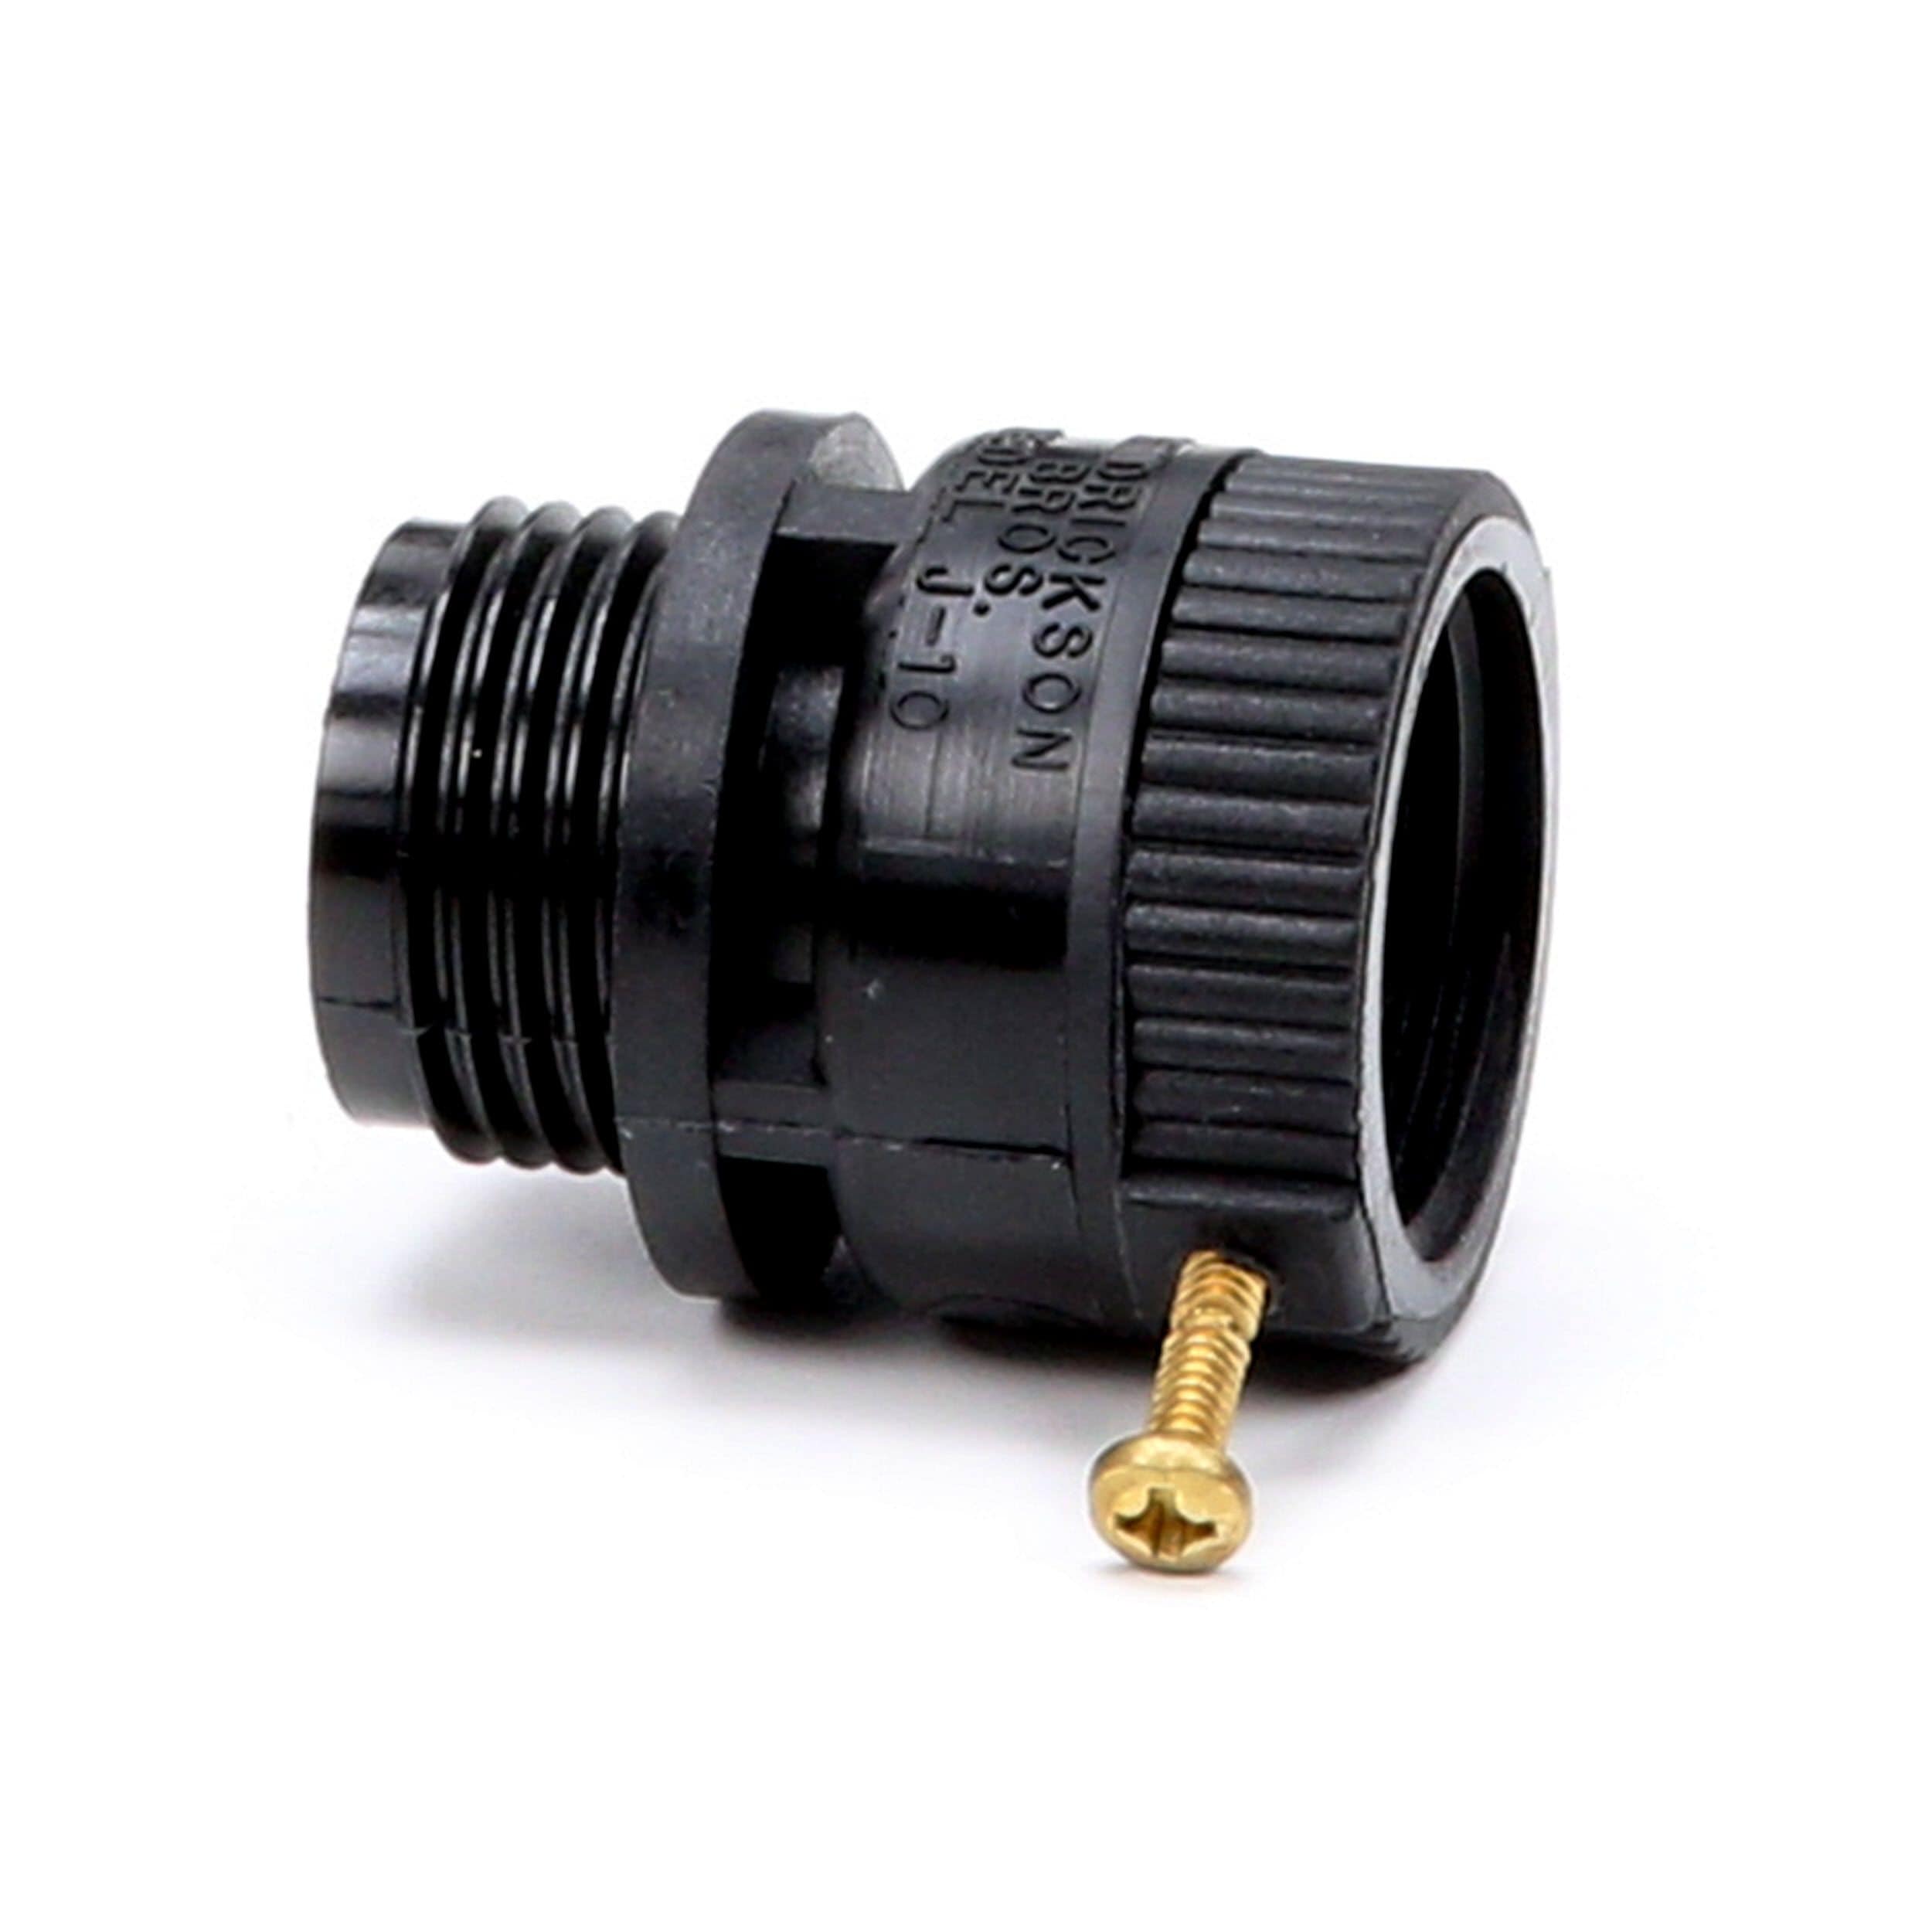 Black Plastic 3-Pack 0.25-in Male Inlet Barbed Drip Irrigation On/Off Valves